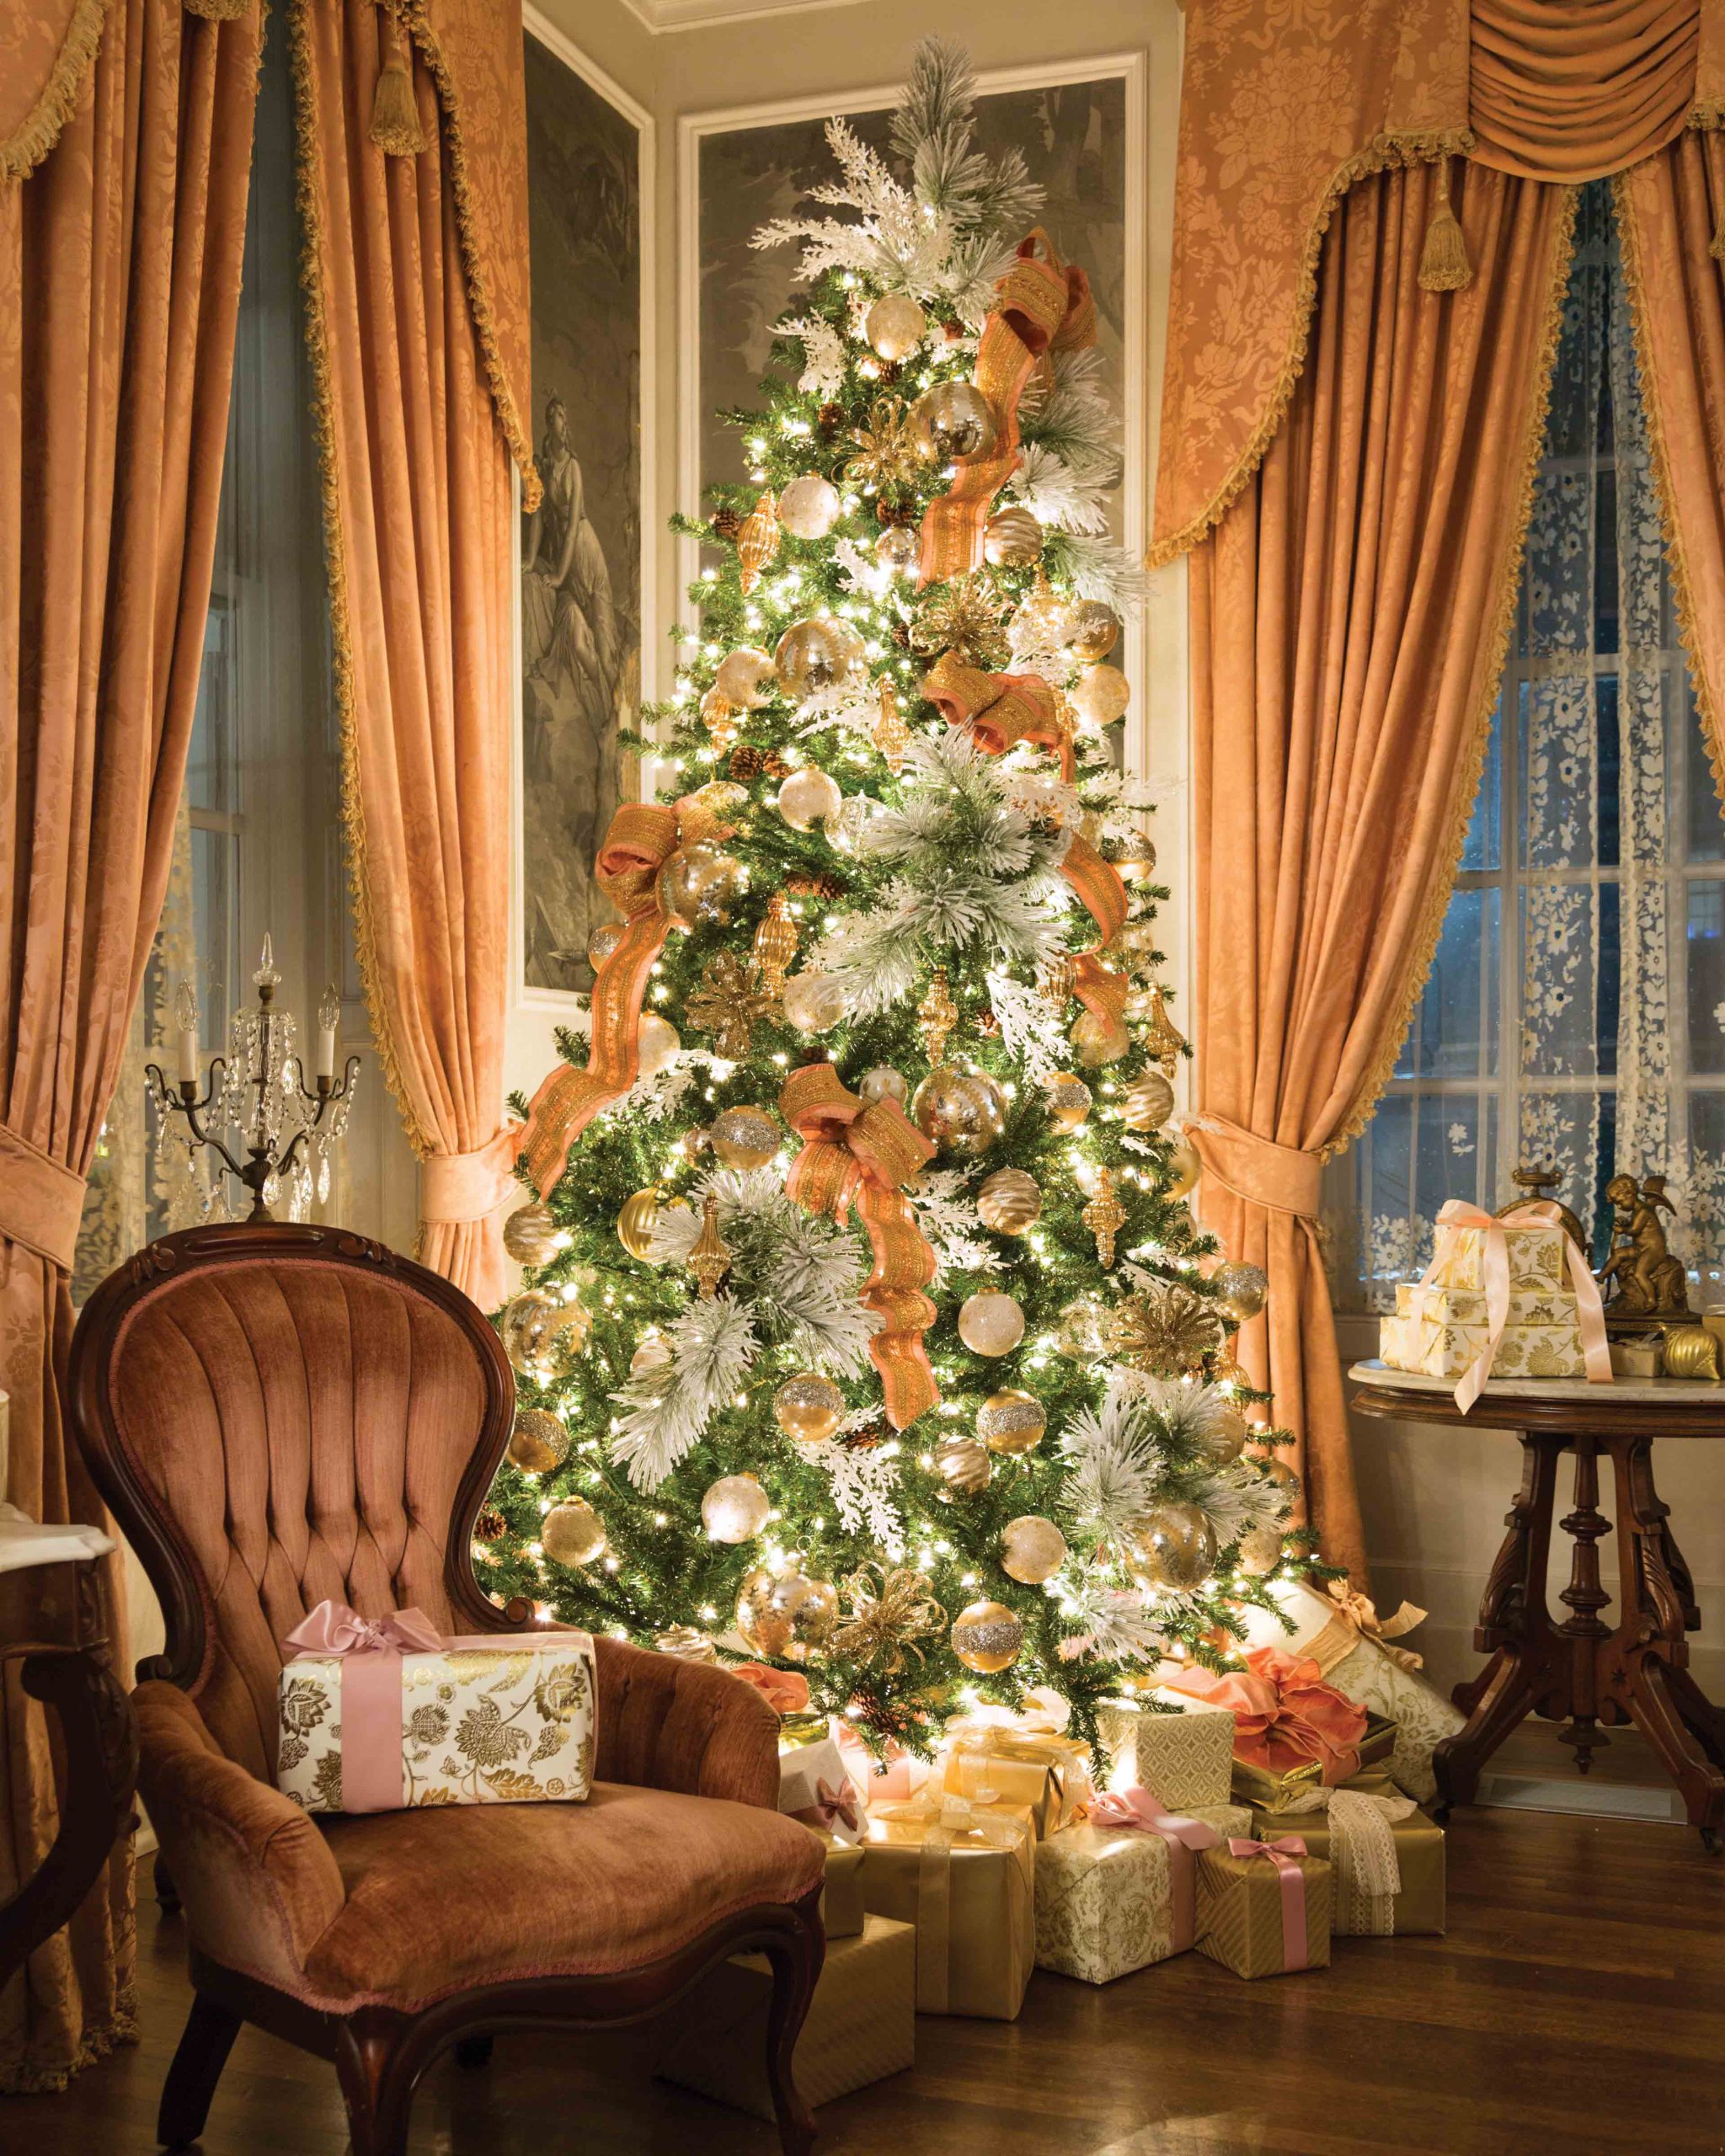 Against a backdrop of coral-hued curtains and artistic panels, an evergreen with frosted branches is adorned with pink and gold ribbons, white, silver, and gold ornaments, and shimmering lights.